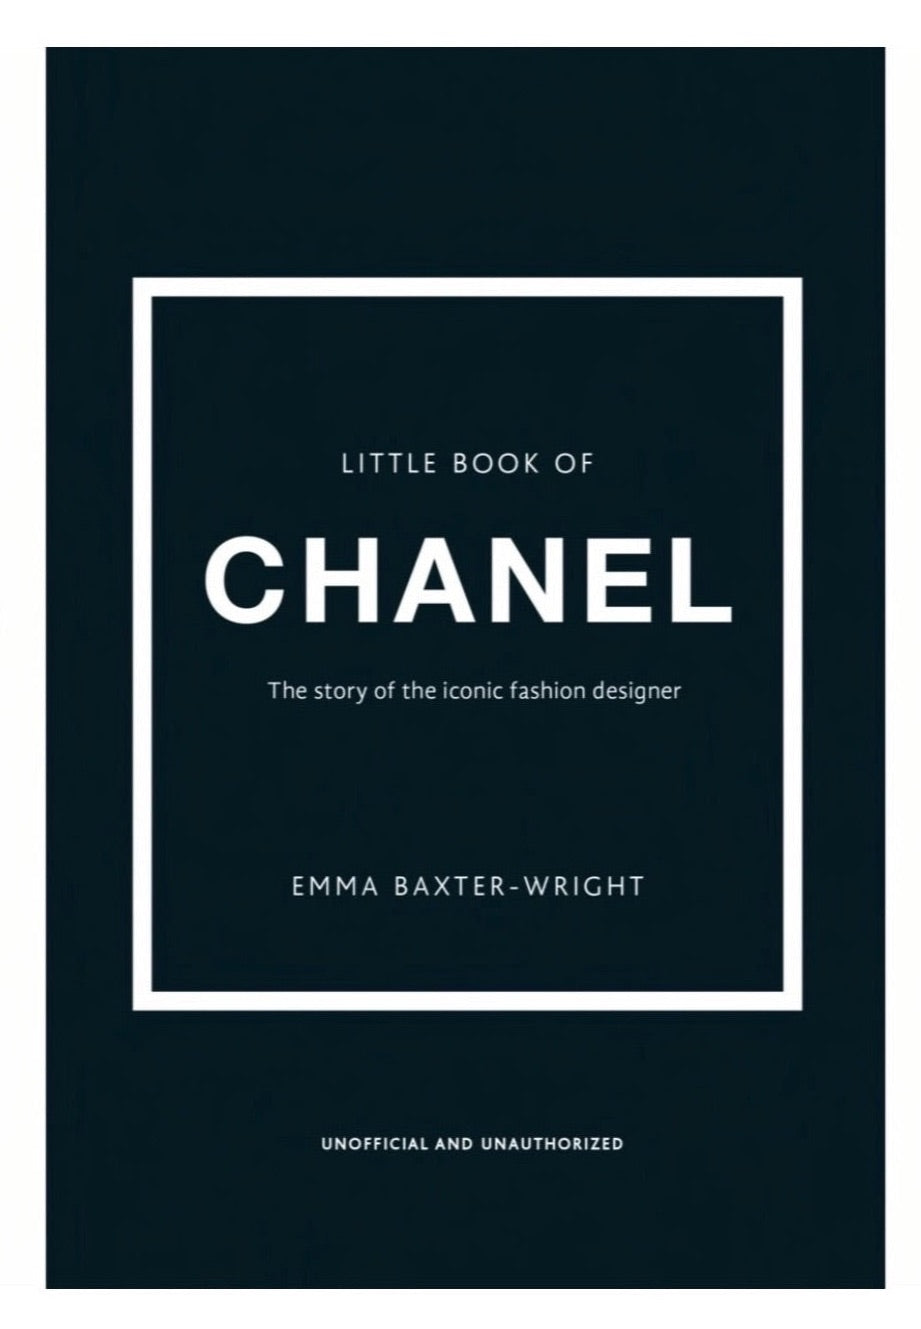 Little Book of Chanel by Emma Baxter-Wright – DAS Decor